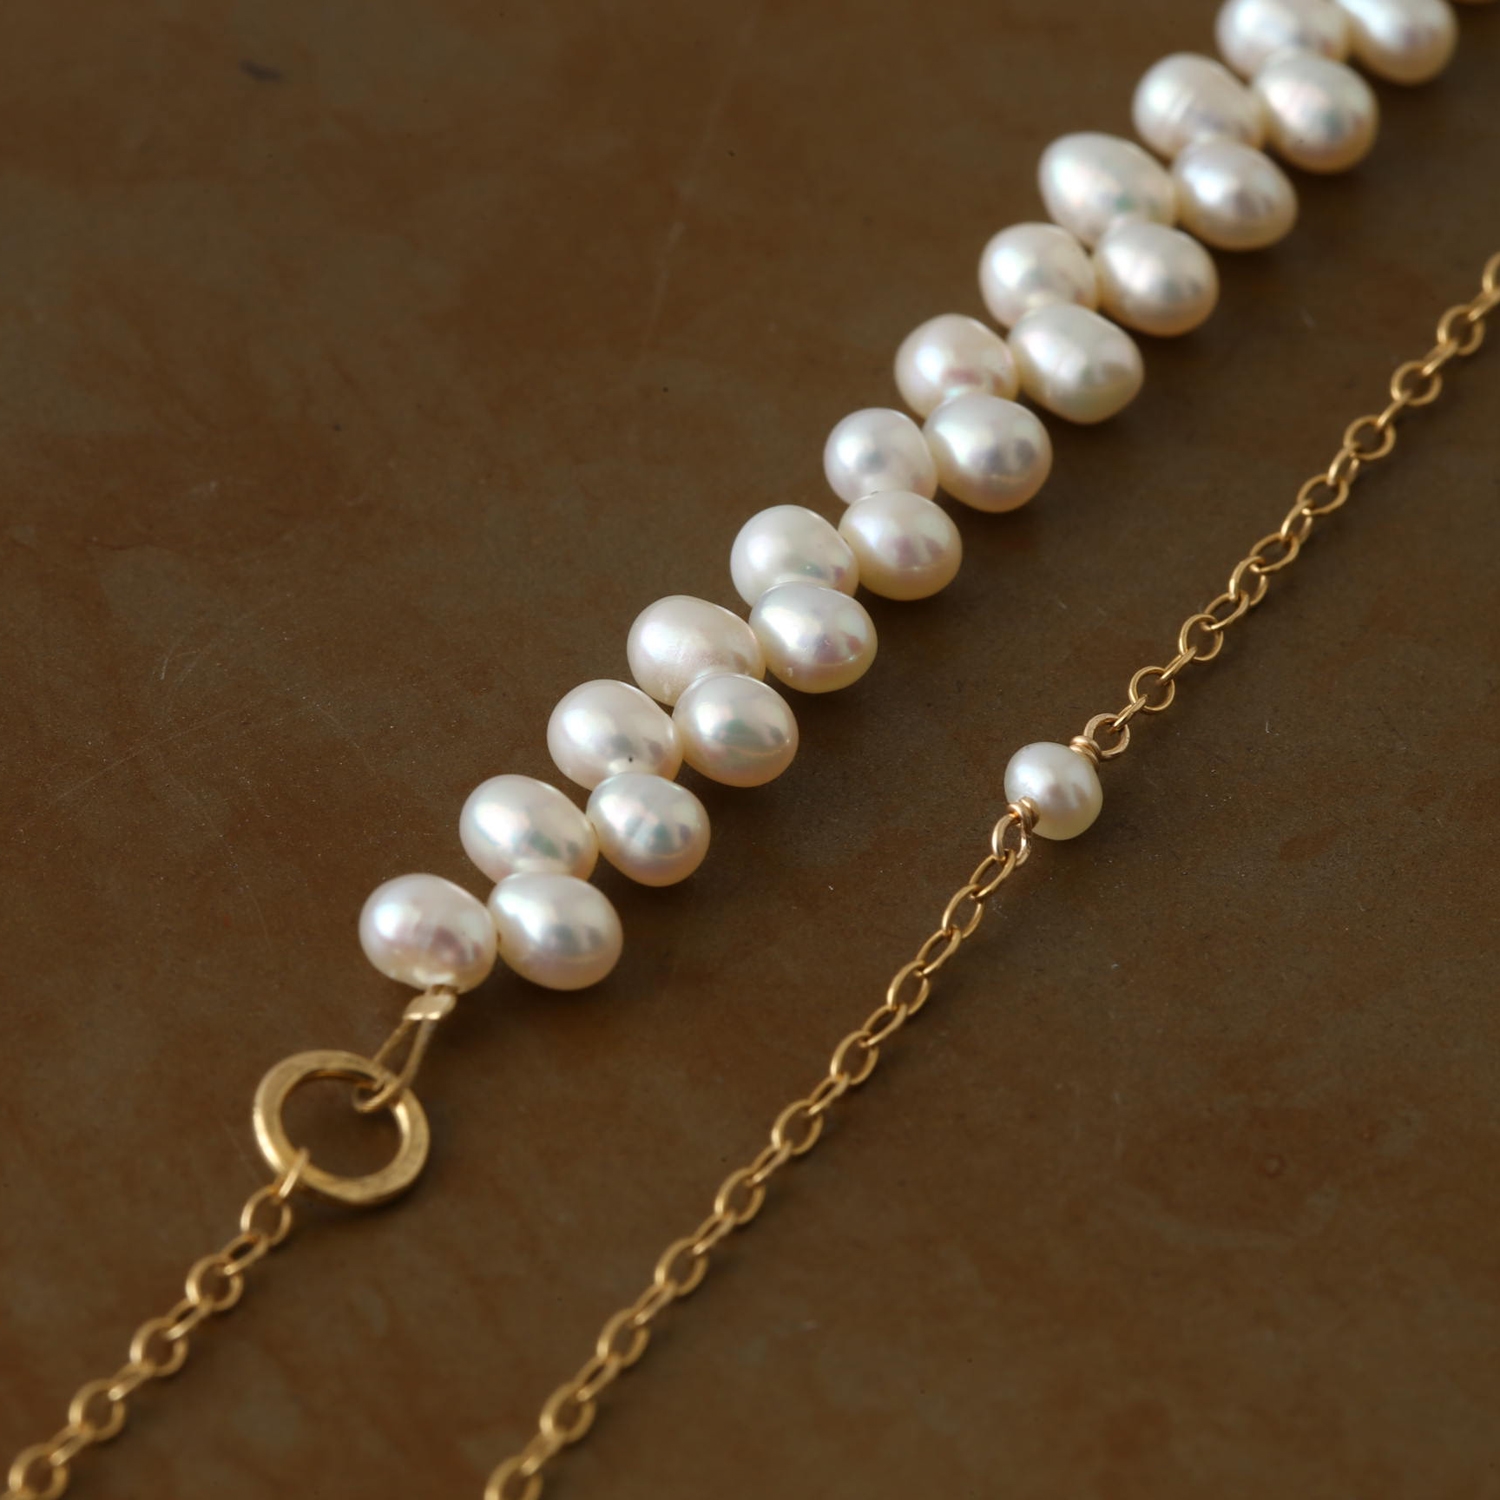 misa/two way frill pearl necklace -【当店限定】大人気の2way